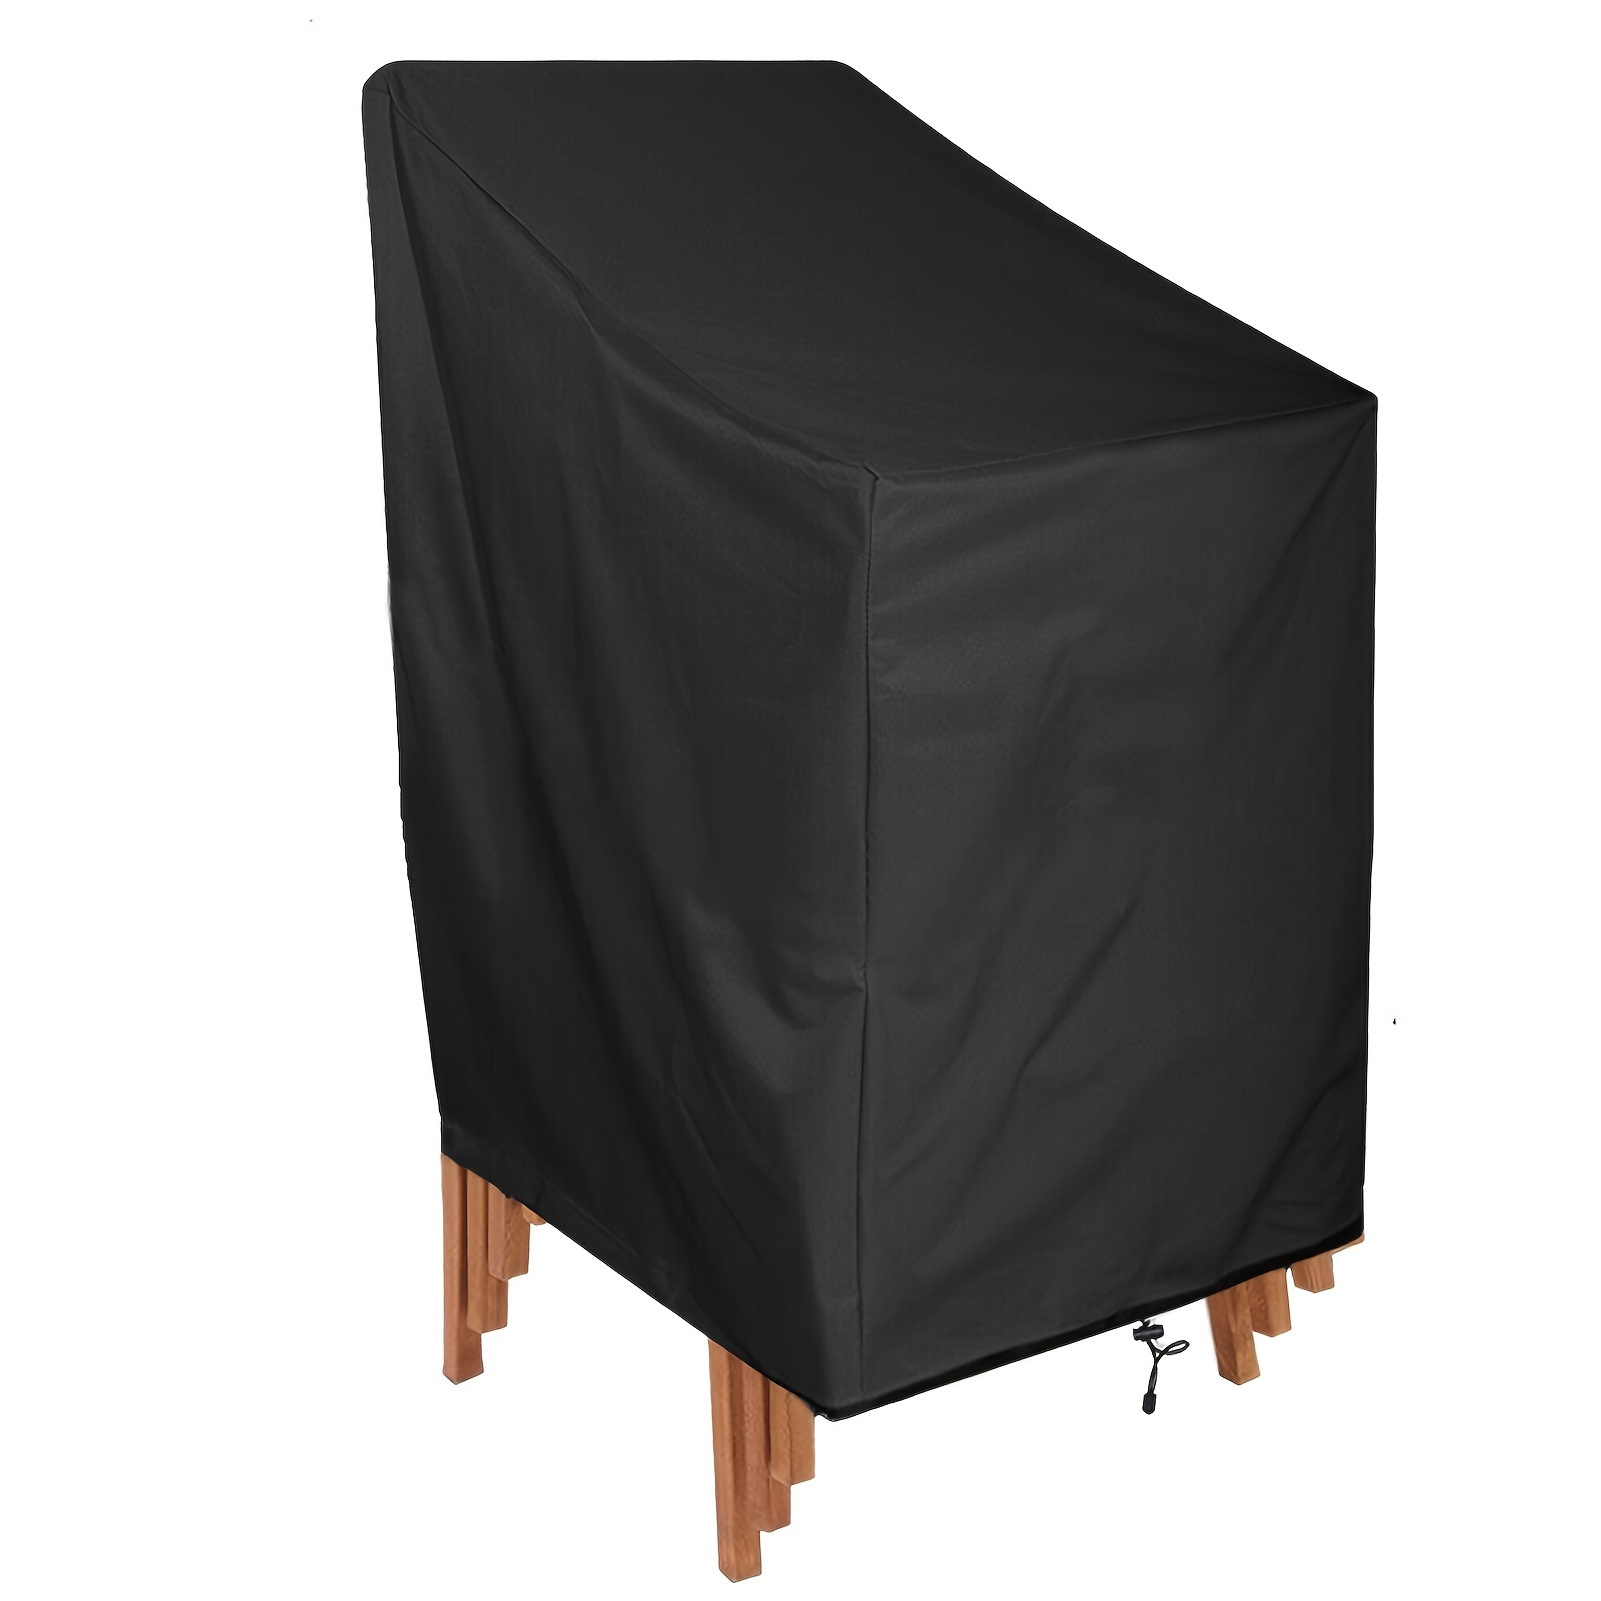 

Protect Your Outdoor Furniture With This Waterproof, Dustproof, Sunscreen Cover - 210d Oxford Cloth